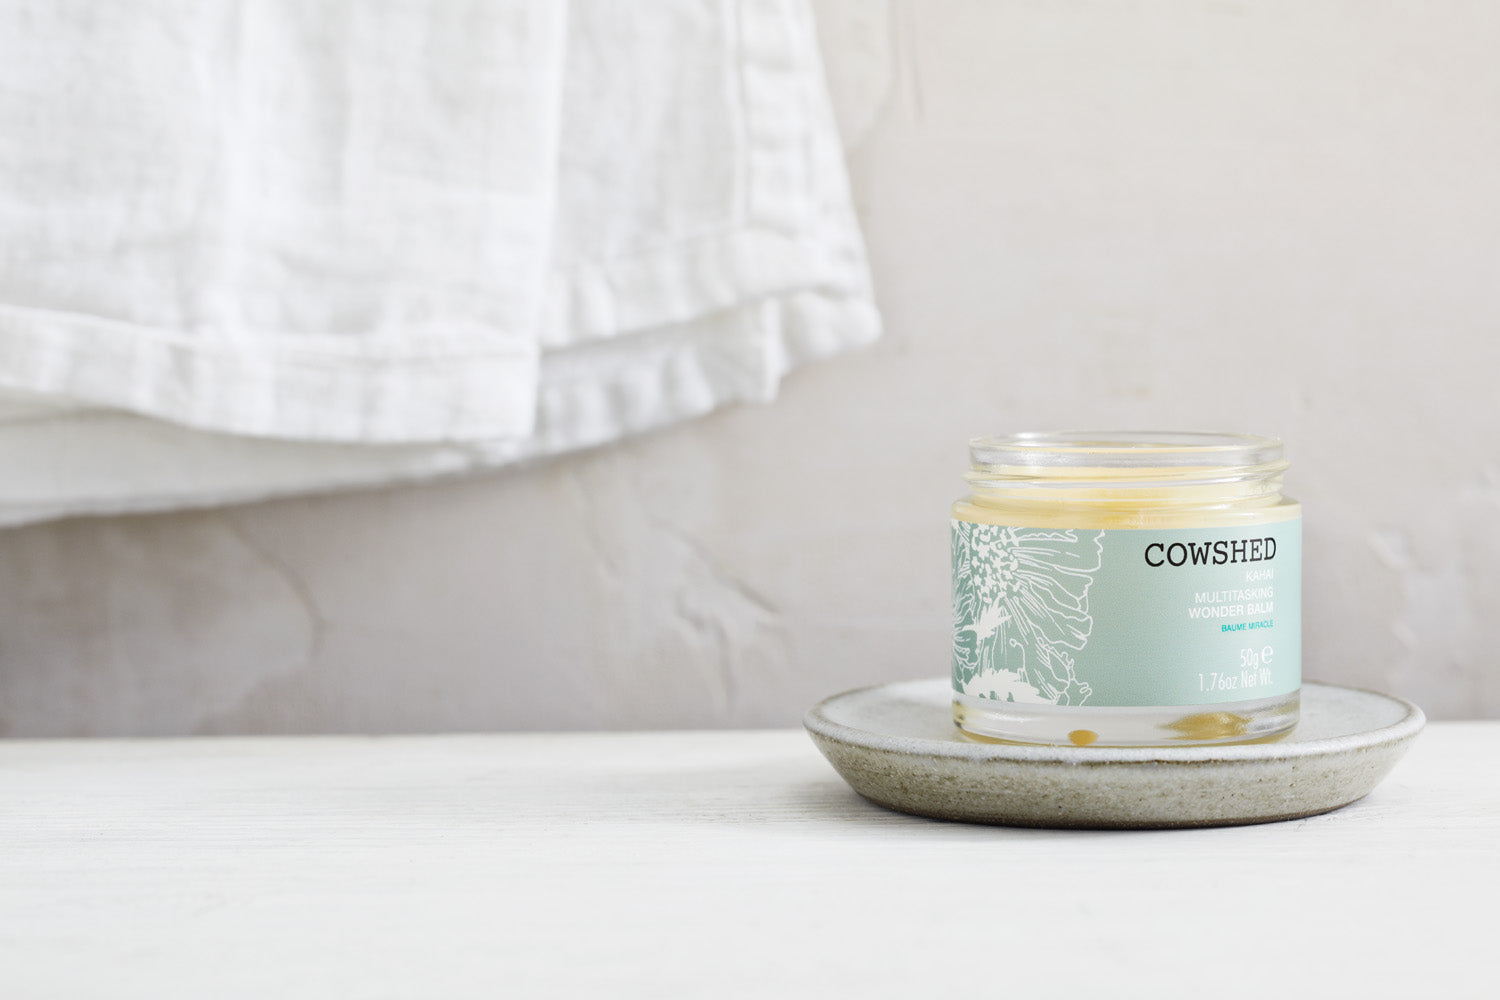 Kirsty Whyte - Cowshed Wonderbalm - Soho House